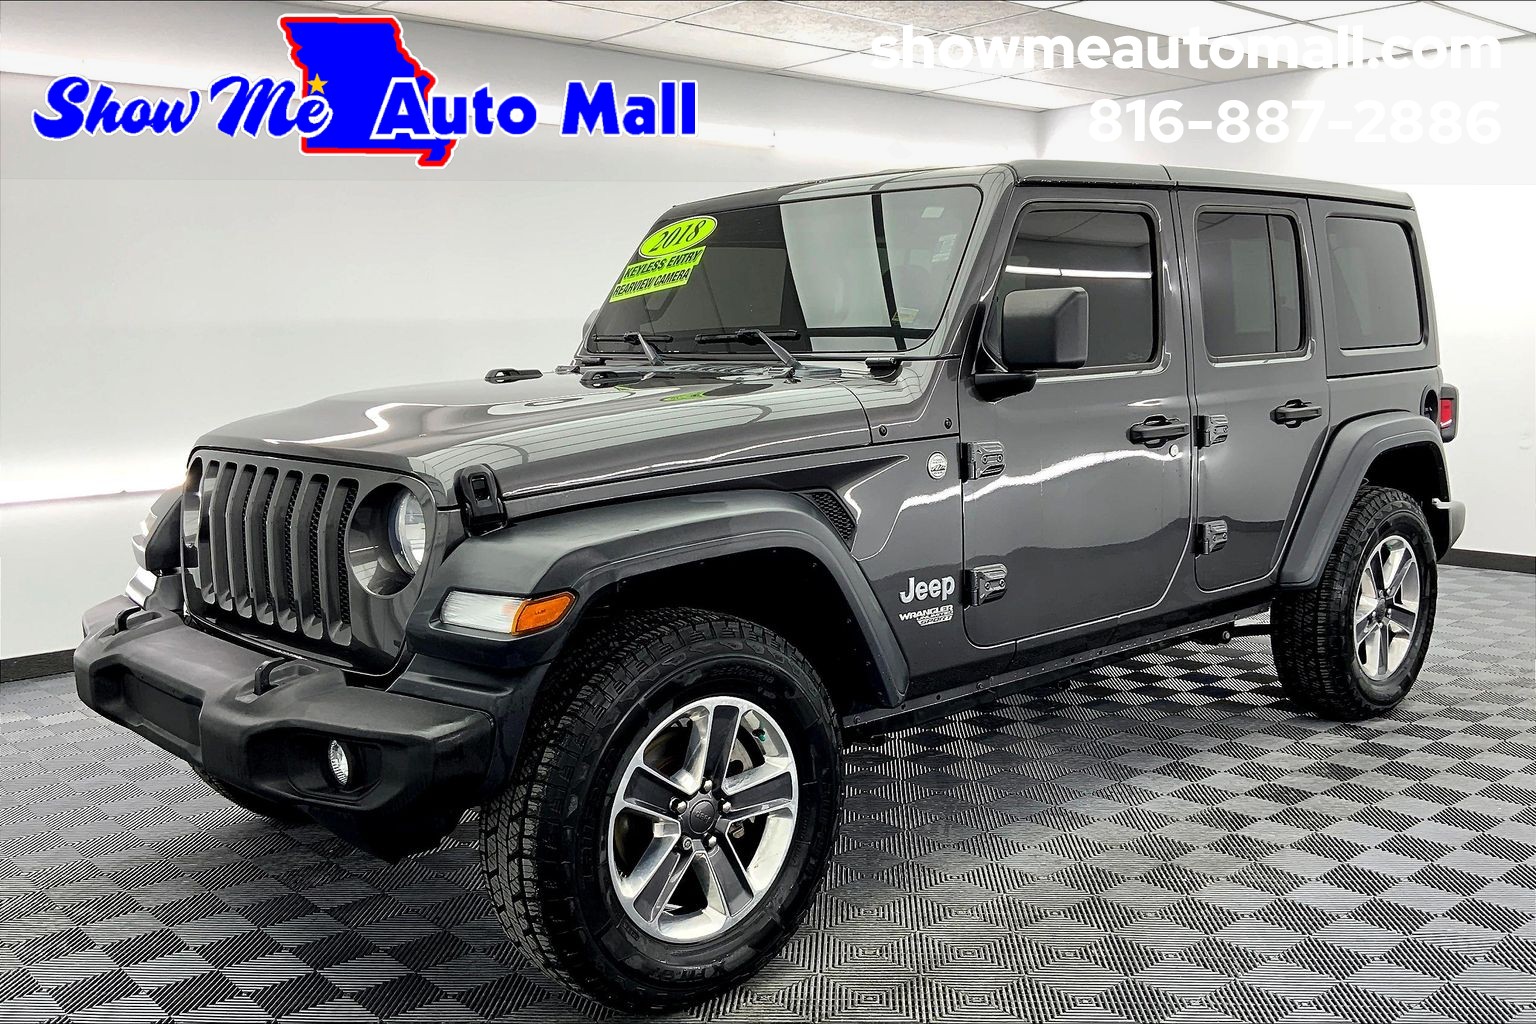 Pre-Owned 2018 Jeep Wrangler Unlimited Sport 4D Sport Utility in  Harrisonville #14337 | Show Me Auto Mall